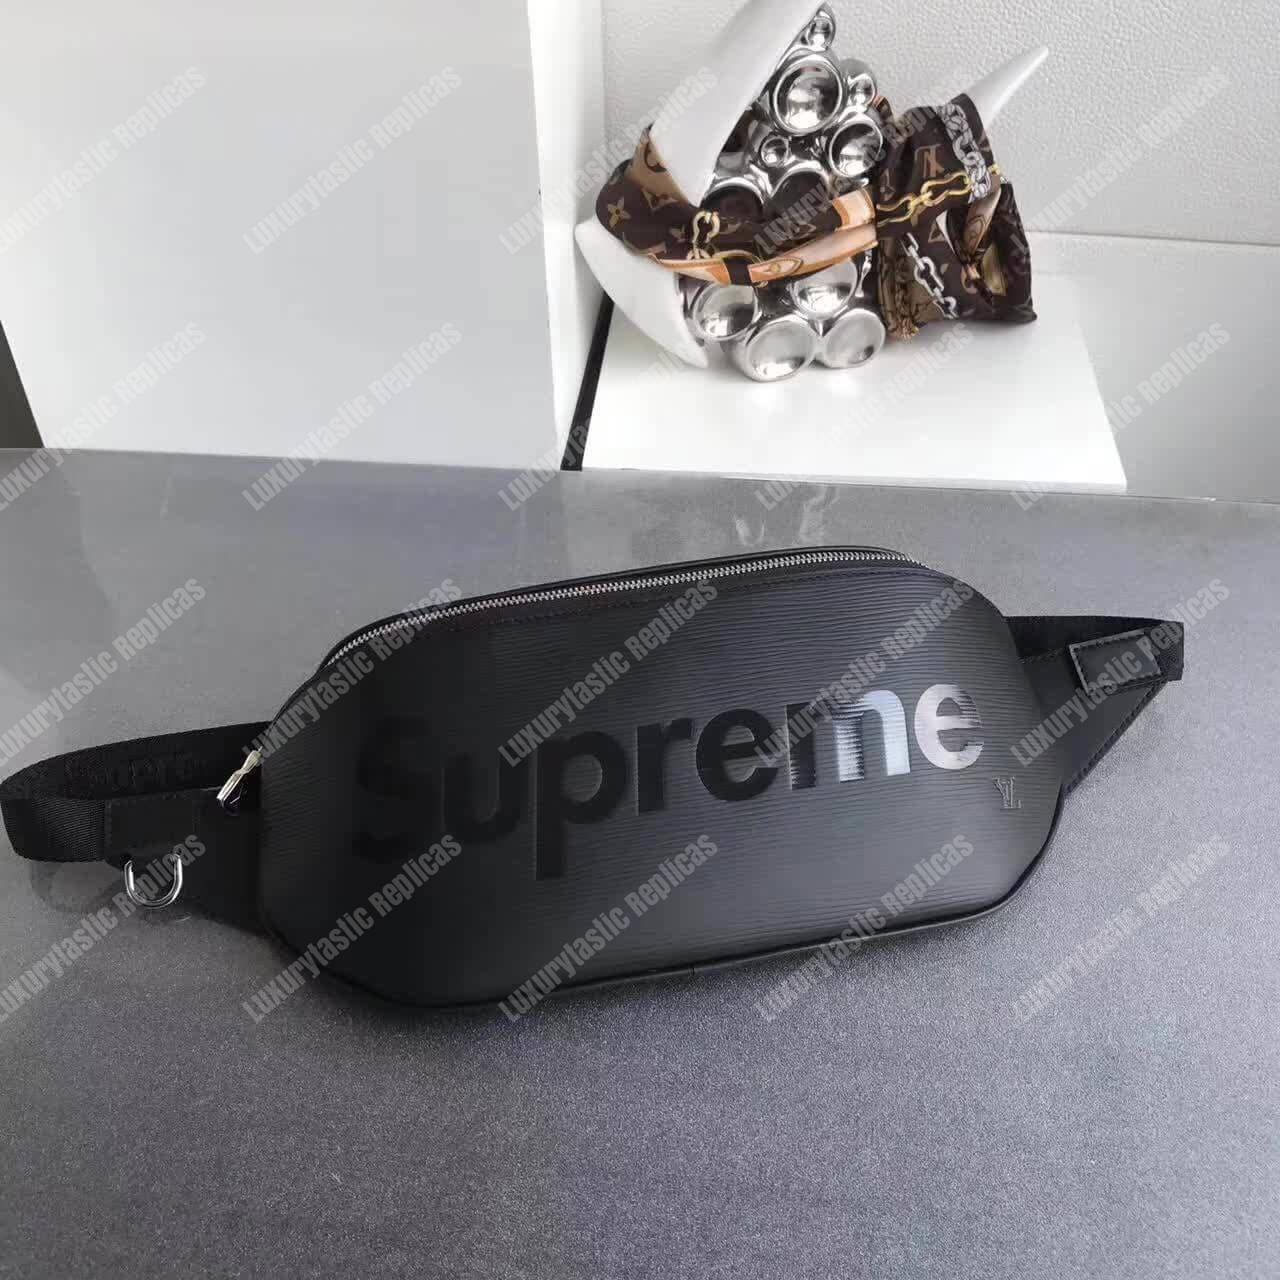 Louis Vuitton X Supreme Bumbag Available For Immediate Sale At